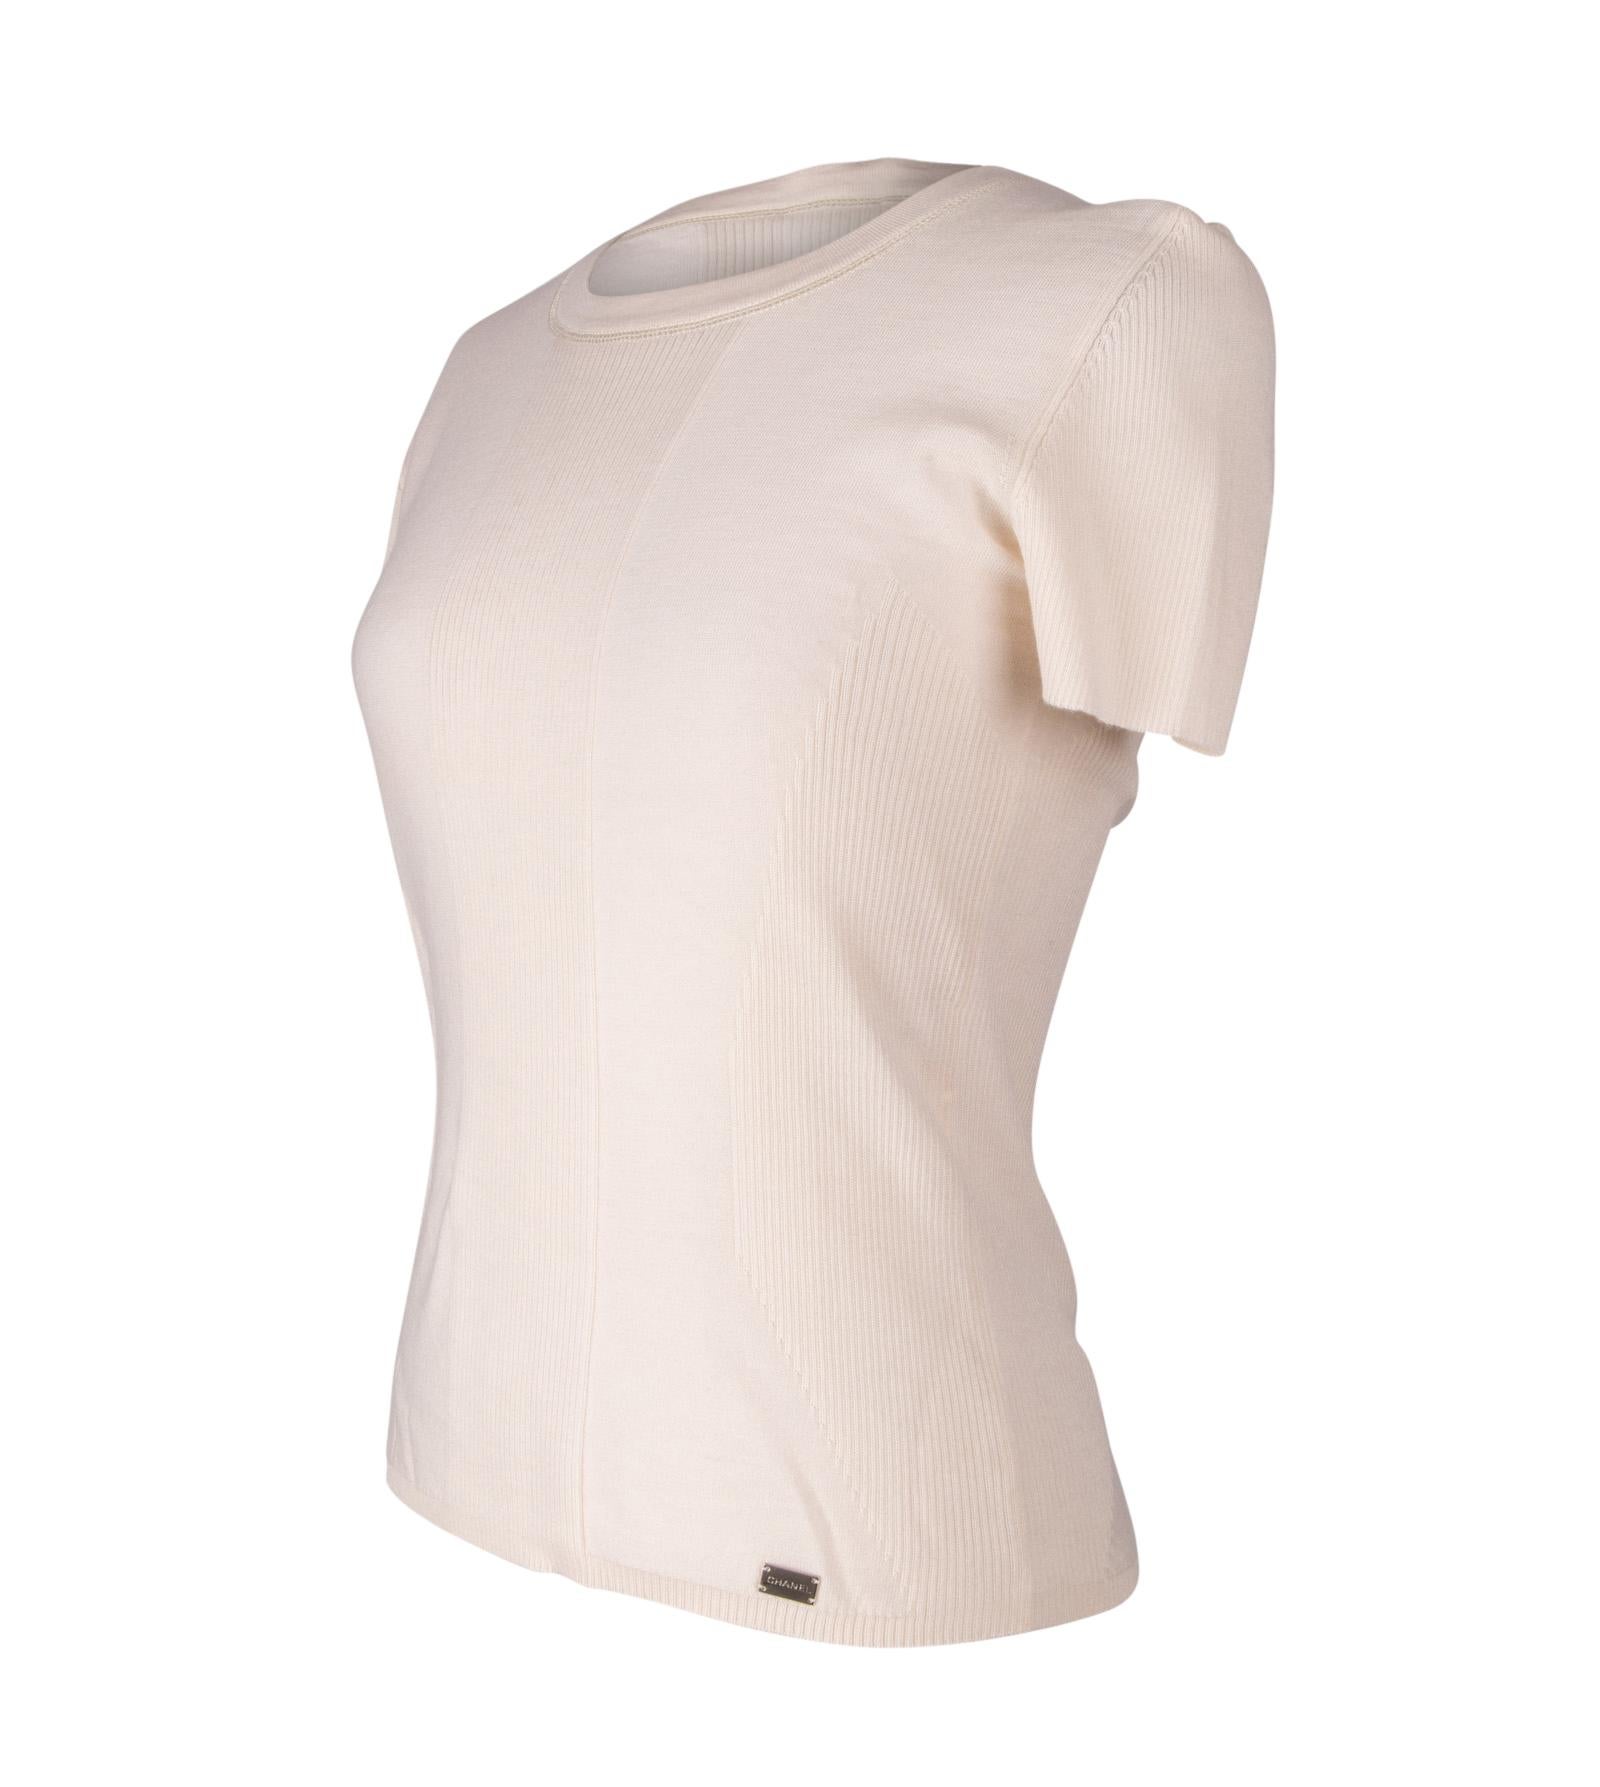 Guaranteed authentic Chanel 03C cream knit shell in soft very light cashmere and silk. 
Ribbed detail down the front and detailed shaped rib at sides.
Top has short sleeves.
Light weight.
Chic and wearable. Very difficult to photograph, please see